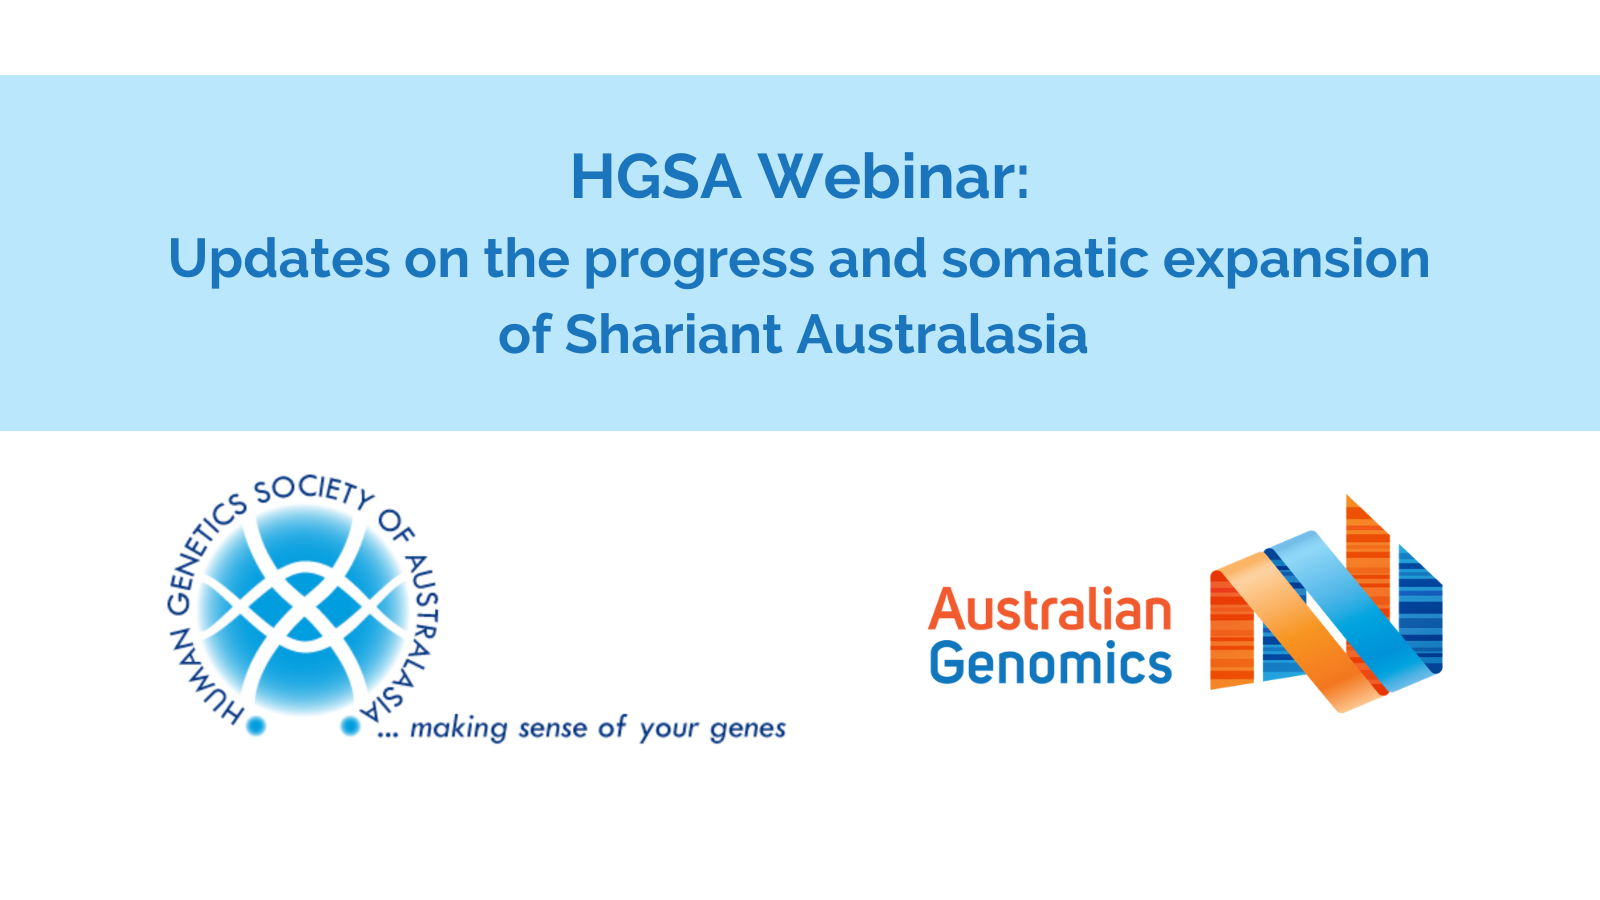 HGSA webinar - Updates on the progress and somatic expansion of Shariant Australasia